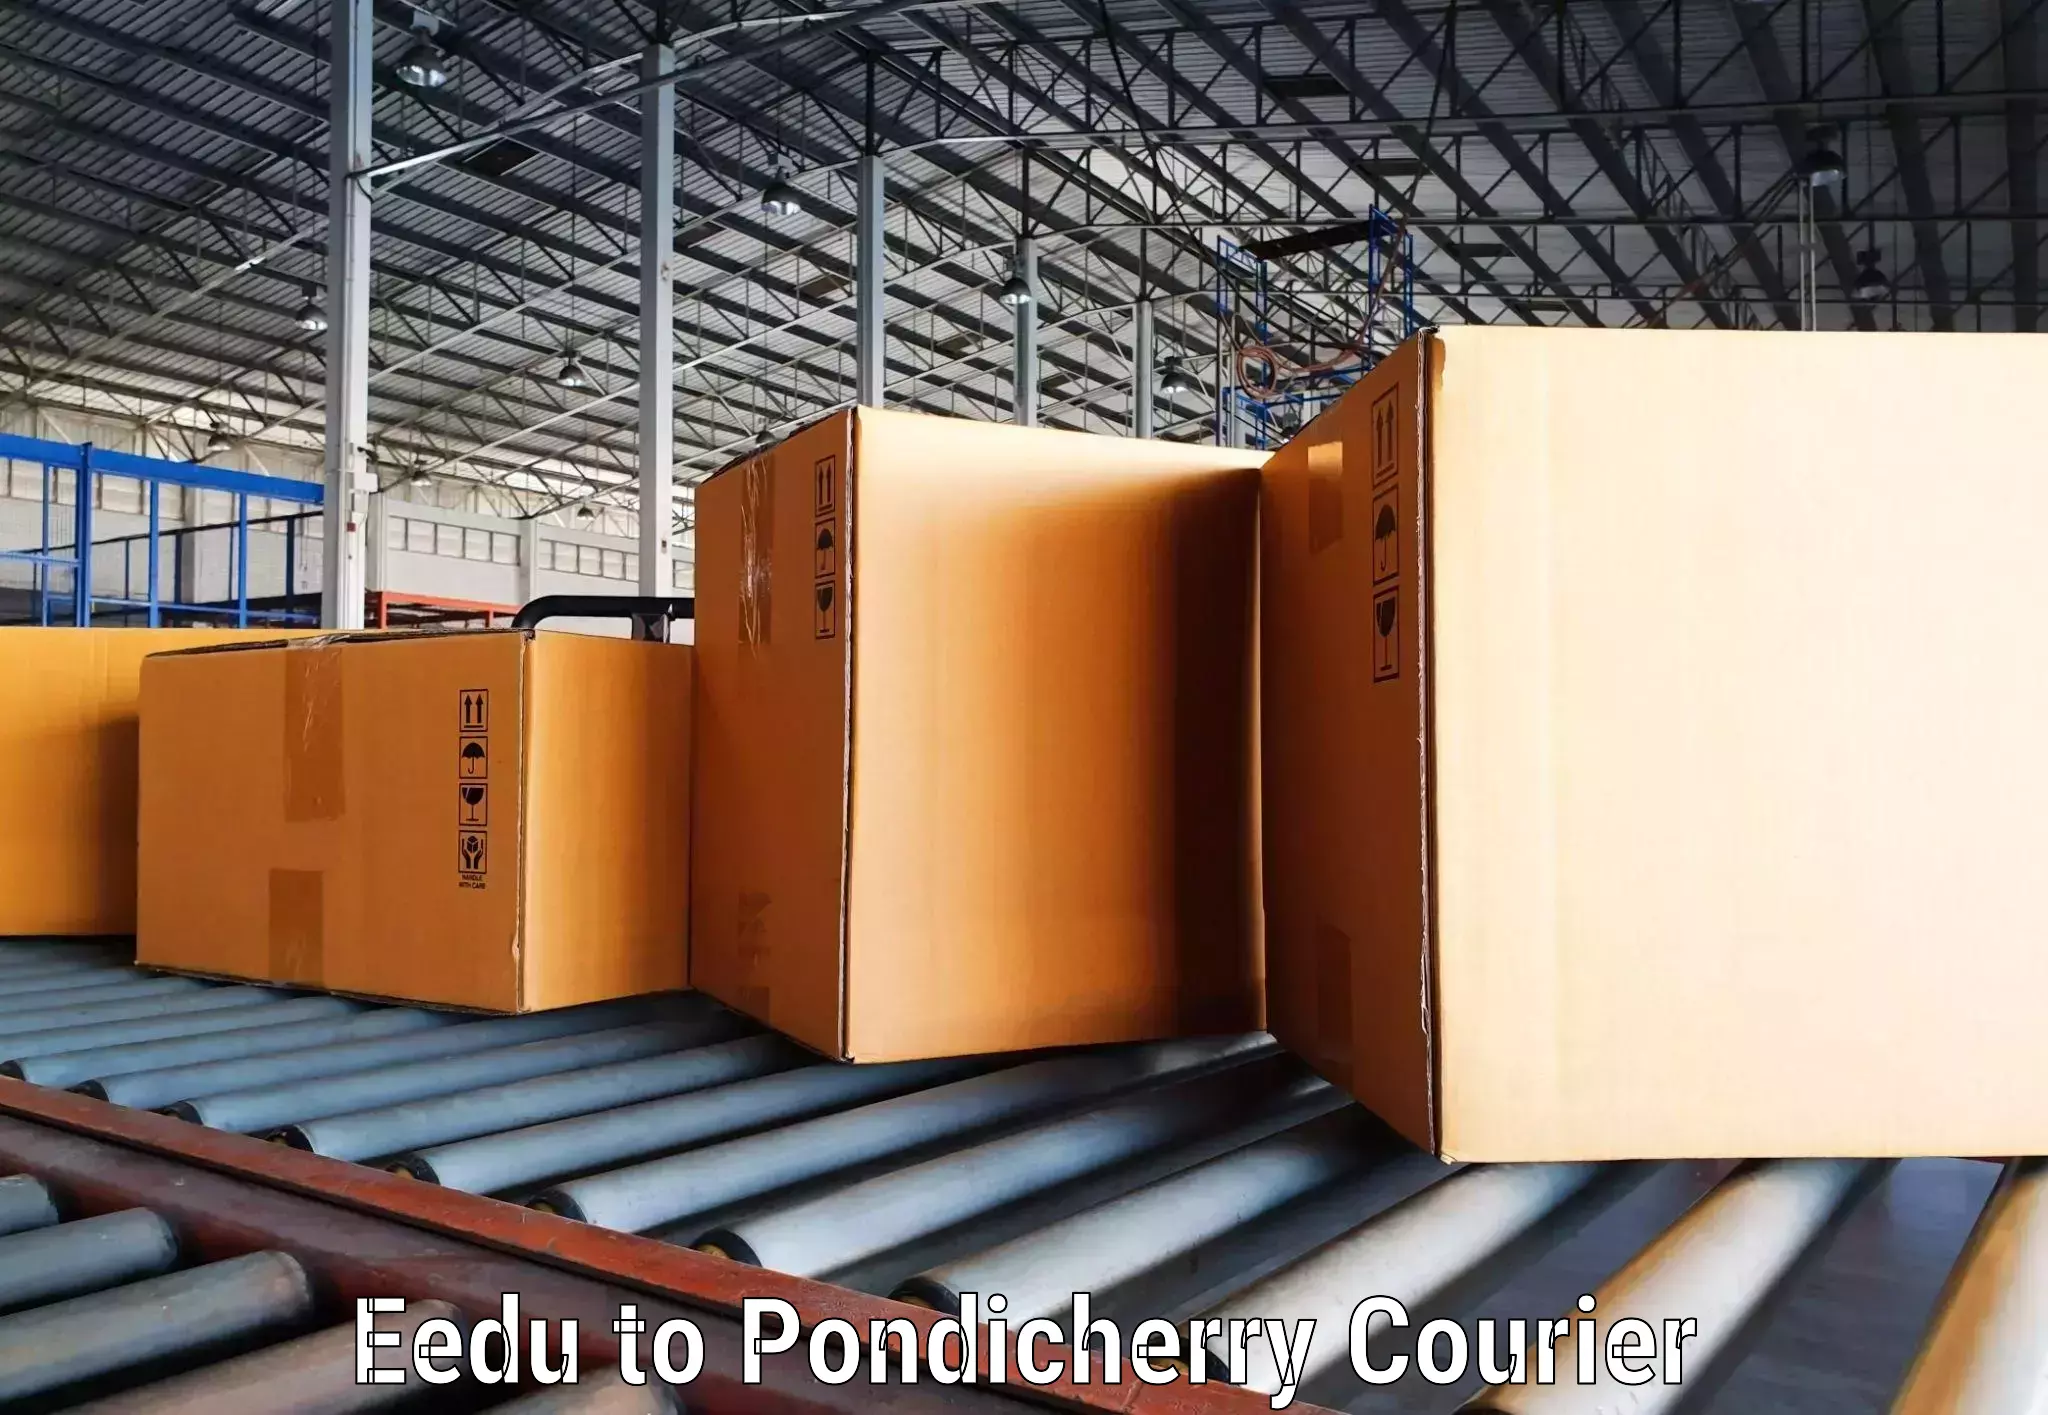 Corporate courier solutions Eedu to Pondicherry University